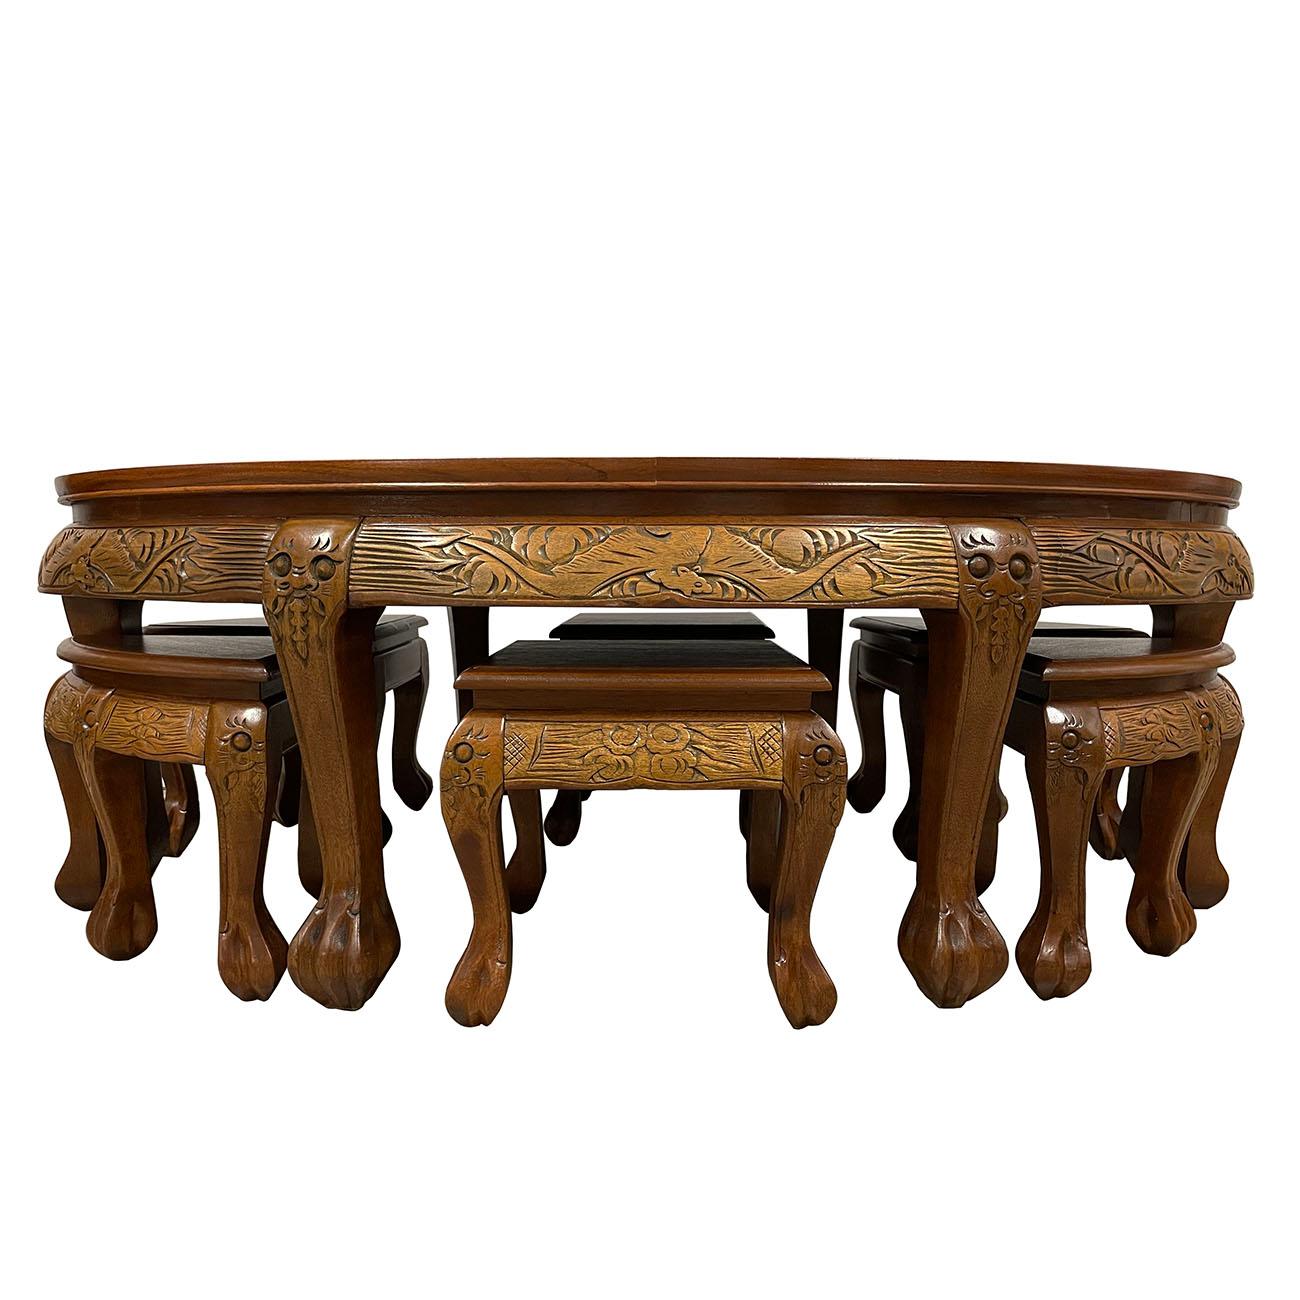 Vintage Chinese Massive Carved Teak Wood Coffee Table with 6 Nesting Stools 5